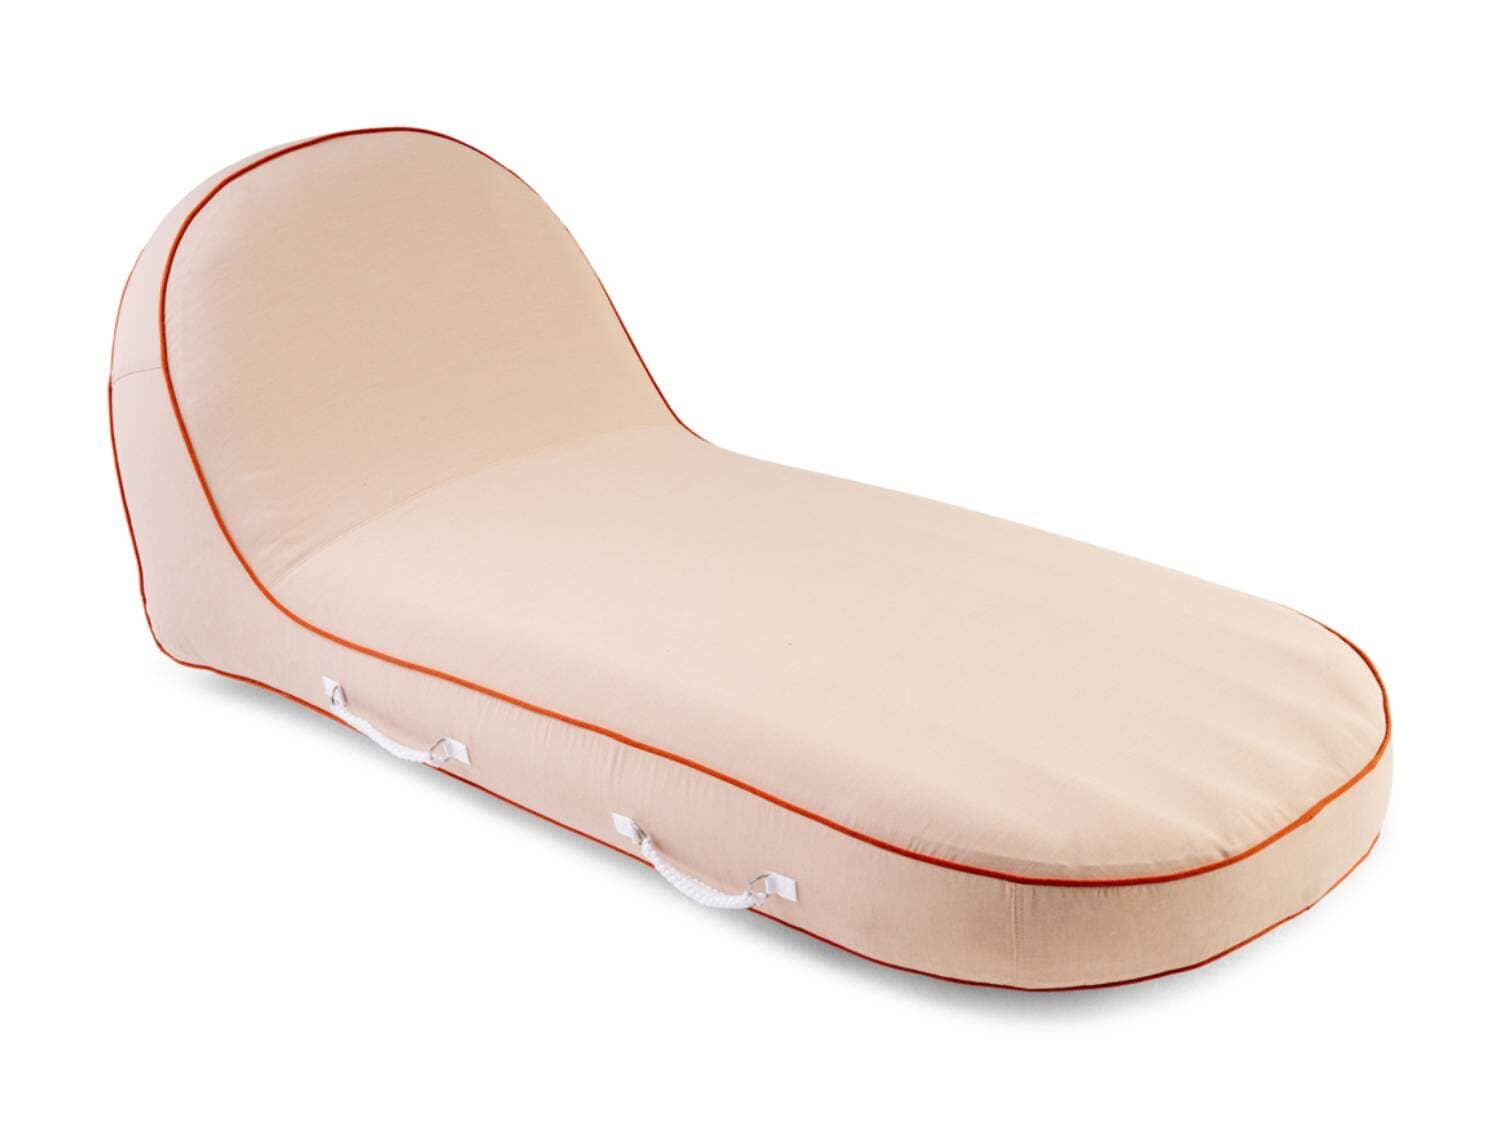 The Pool Lounger - Rivie Pink Pool Lounger Business & Pleasure Co Aus 